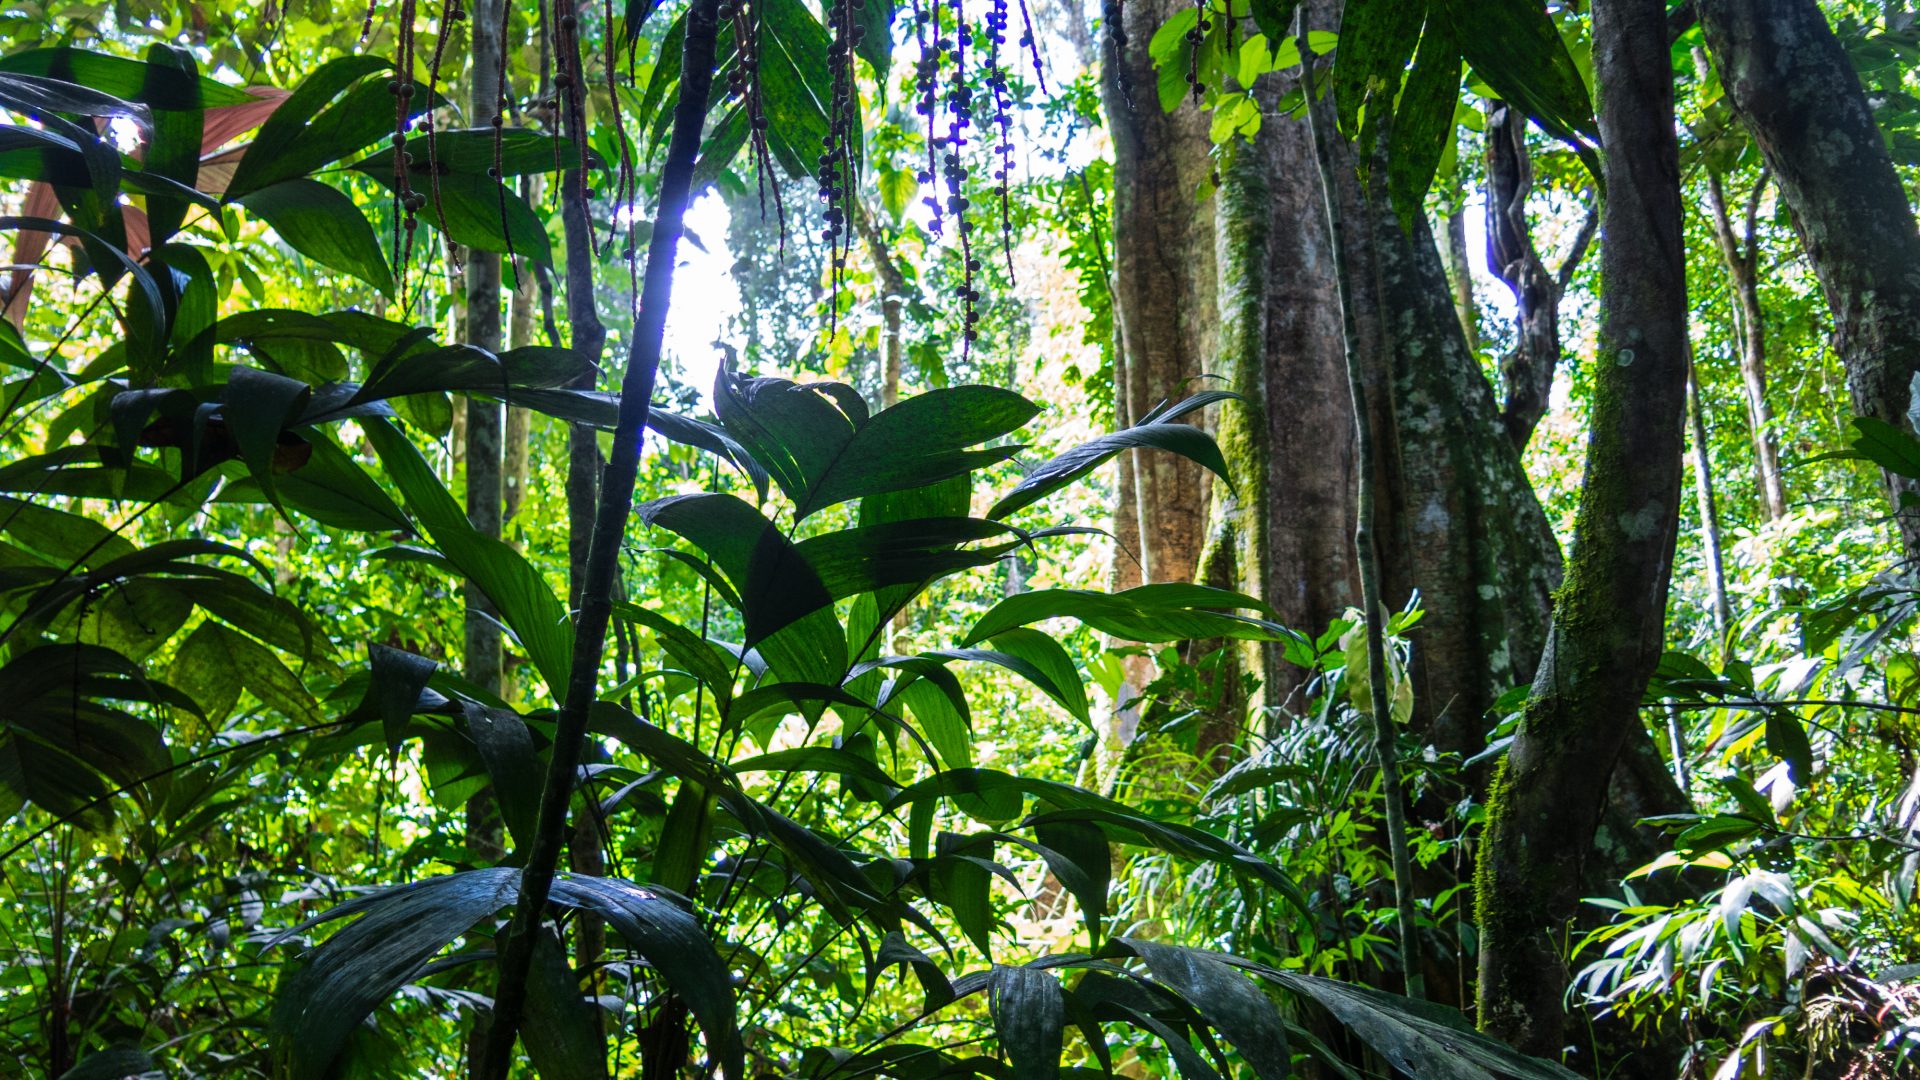 Leaves, vines, and buttress roots fill the frame in this image of dense rainforest undergrowth.